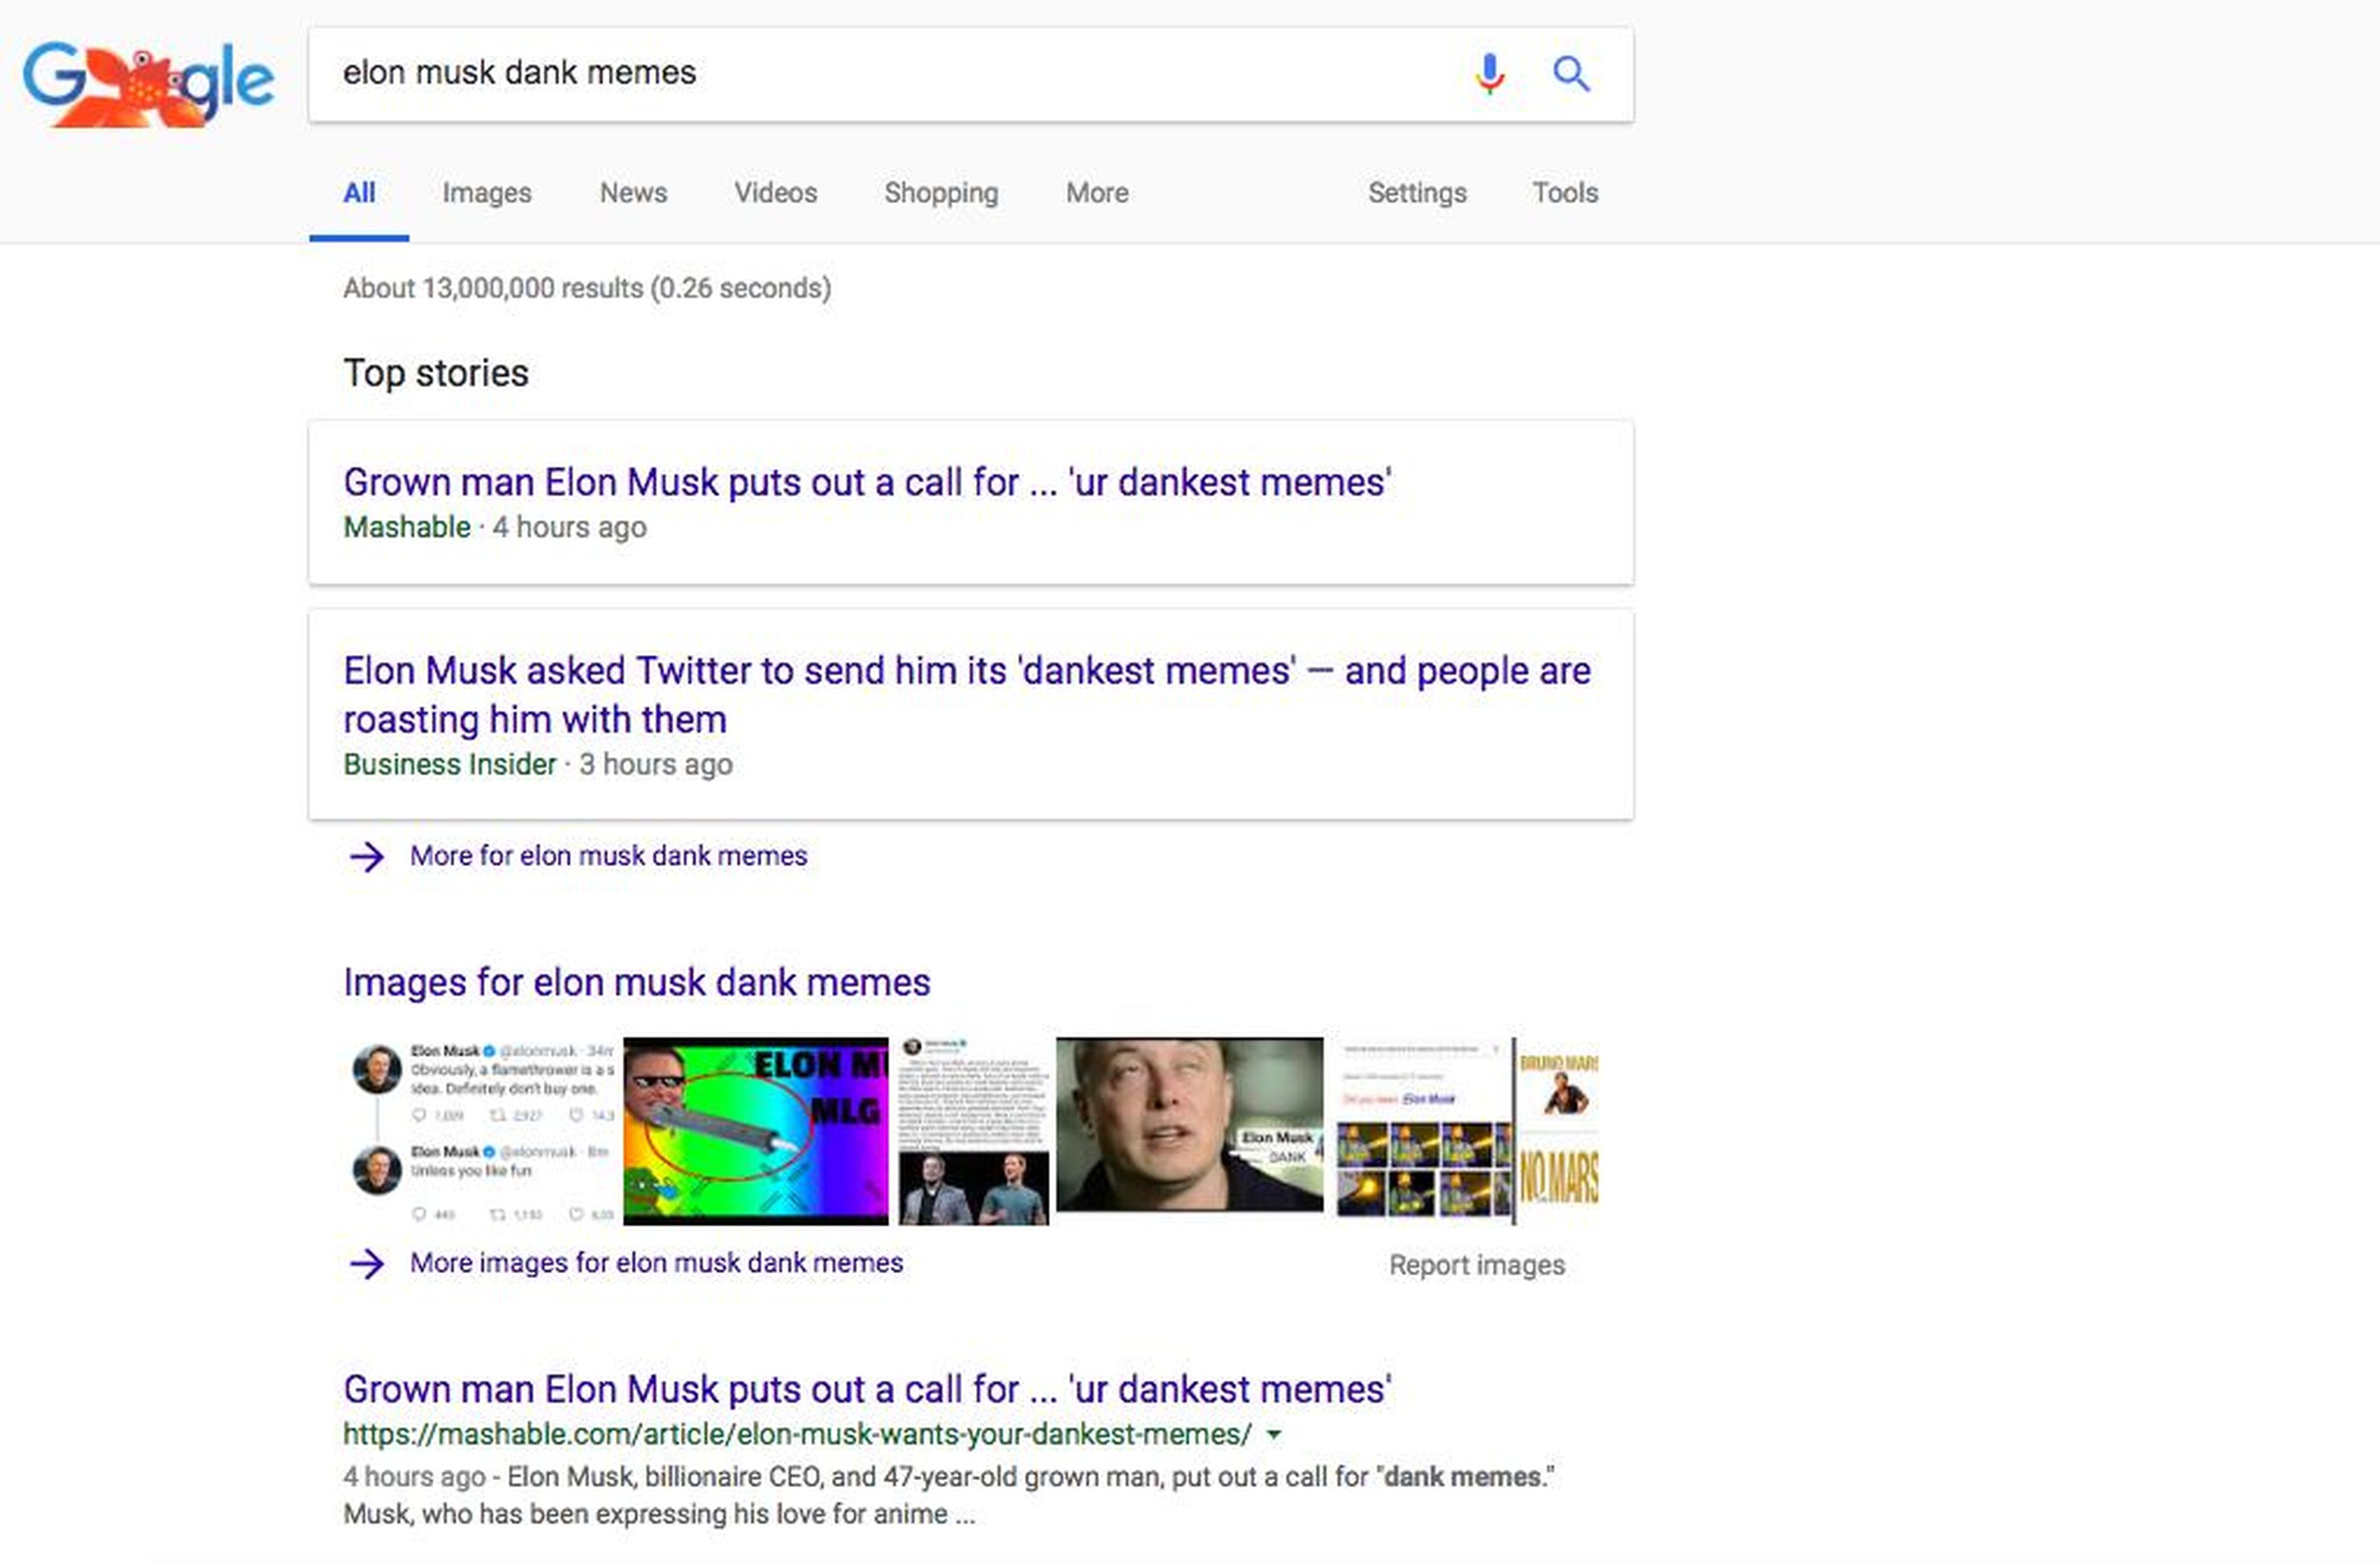 LAYOUT: When it comes to searching for news, Google does the best job of surfacing top stories and making them clearly defined in its design.